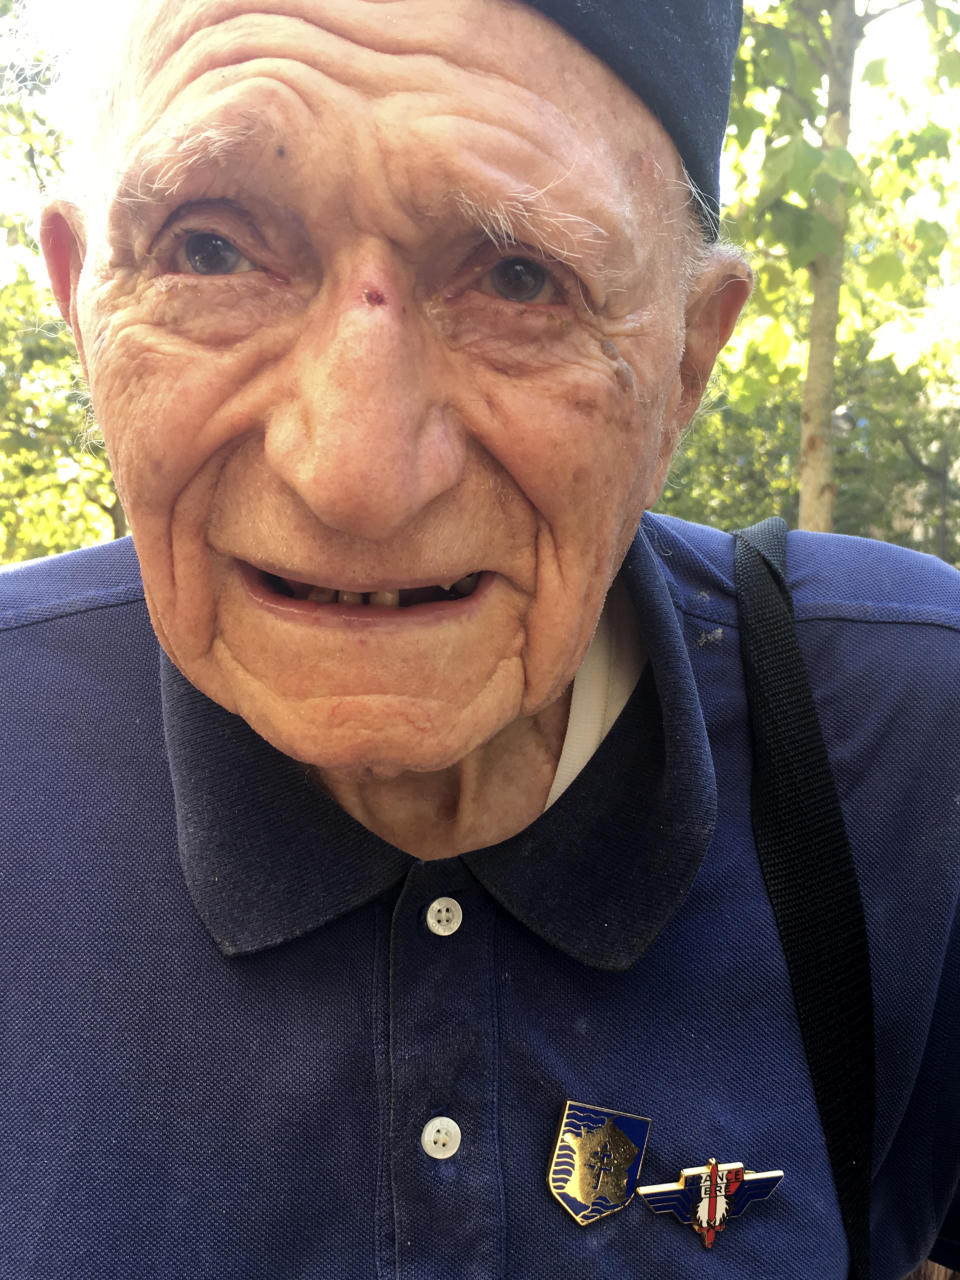 Roger Acher, 96, of France, arrives at a parade marking the 75th anniversary of the Liberation of Paris, Sunday, Aug.25, 2019 in Paris. Acher arrived in Paris near dawn Aug.25, 1944 with the 2nd armored division of Gen. Philippe Leclerc to liberate the city from four years of Nazi occupation. Paris is celebrating the French resistance fighters, American soldiers and others who liberated the City of Light from Nazi occupation exactly 75 years ago. (AP Photo/Elaine Ganley)